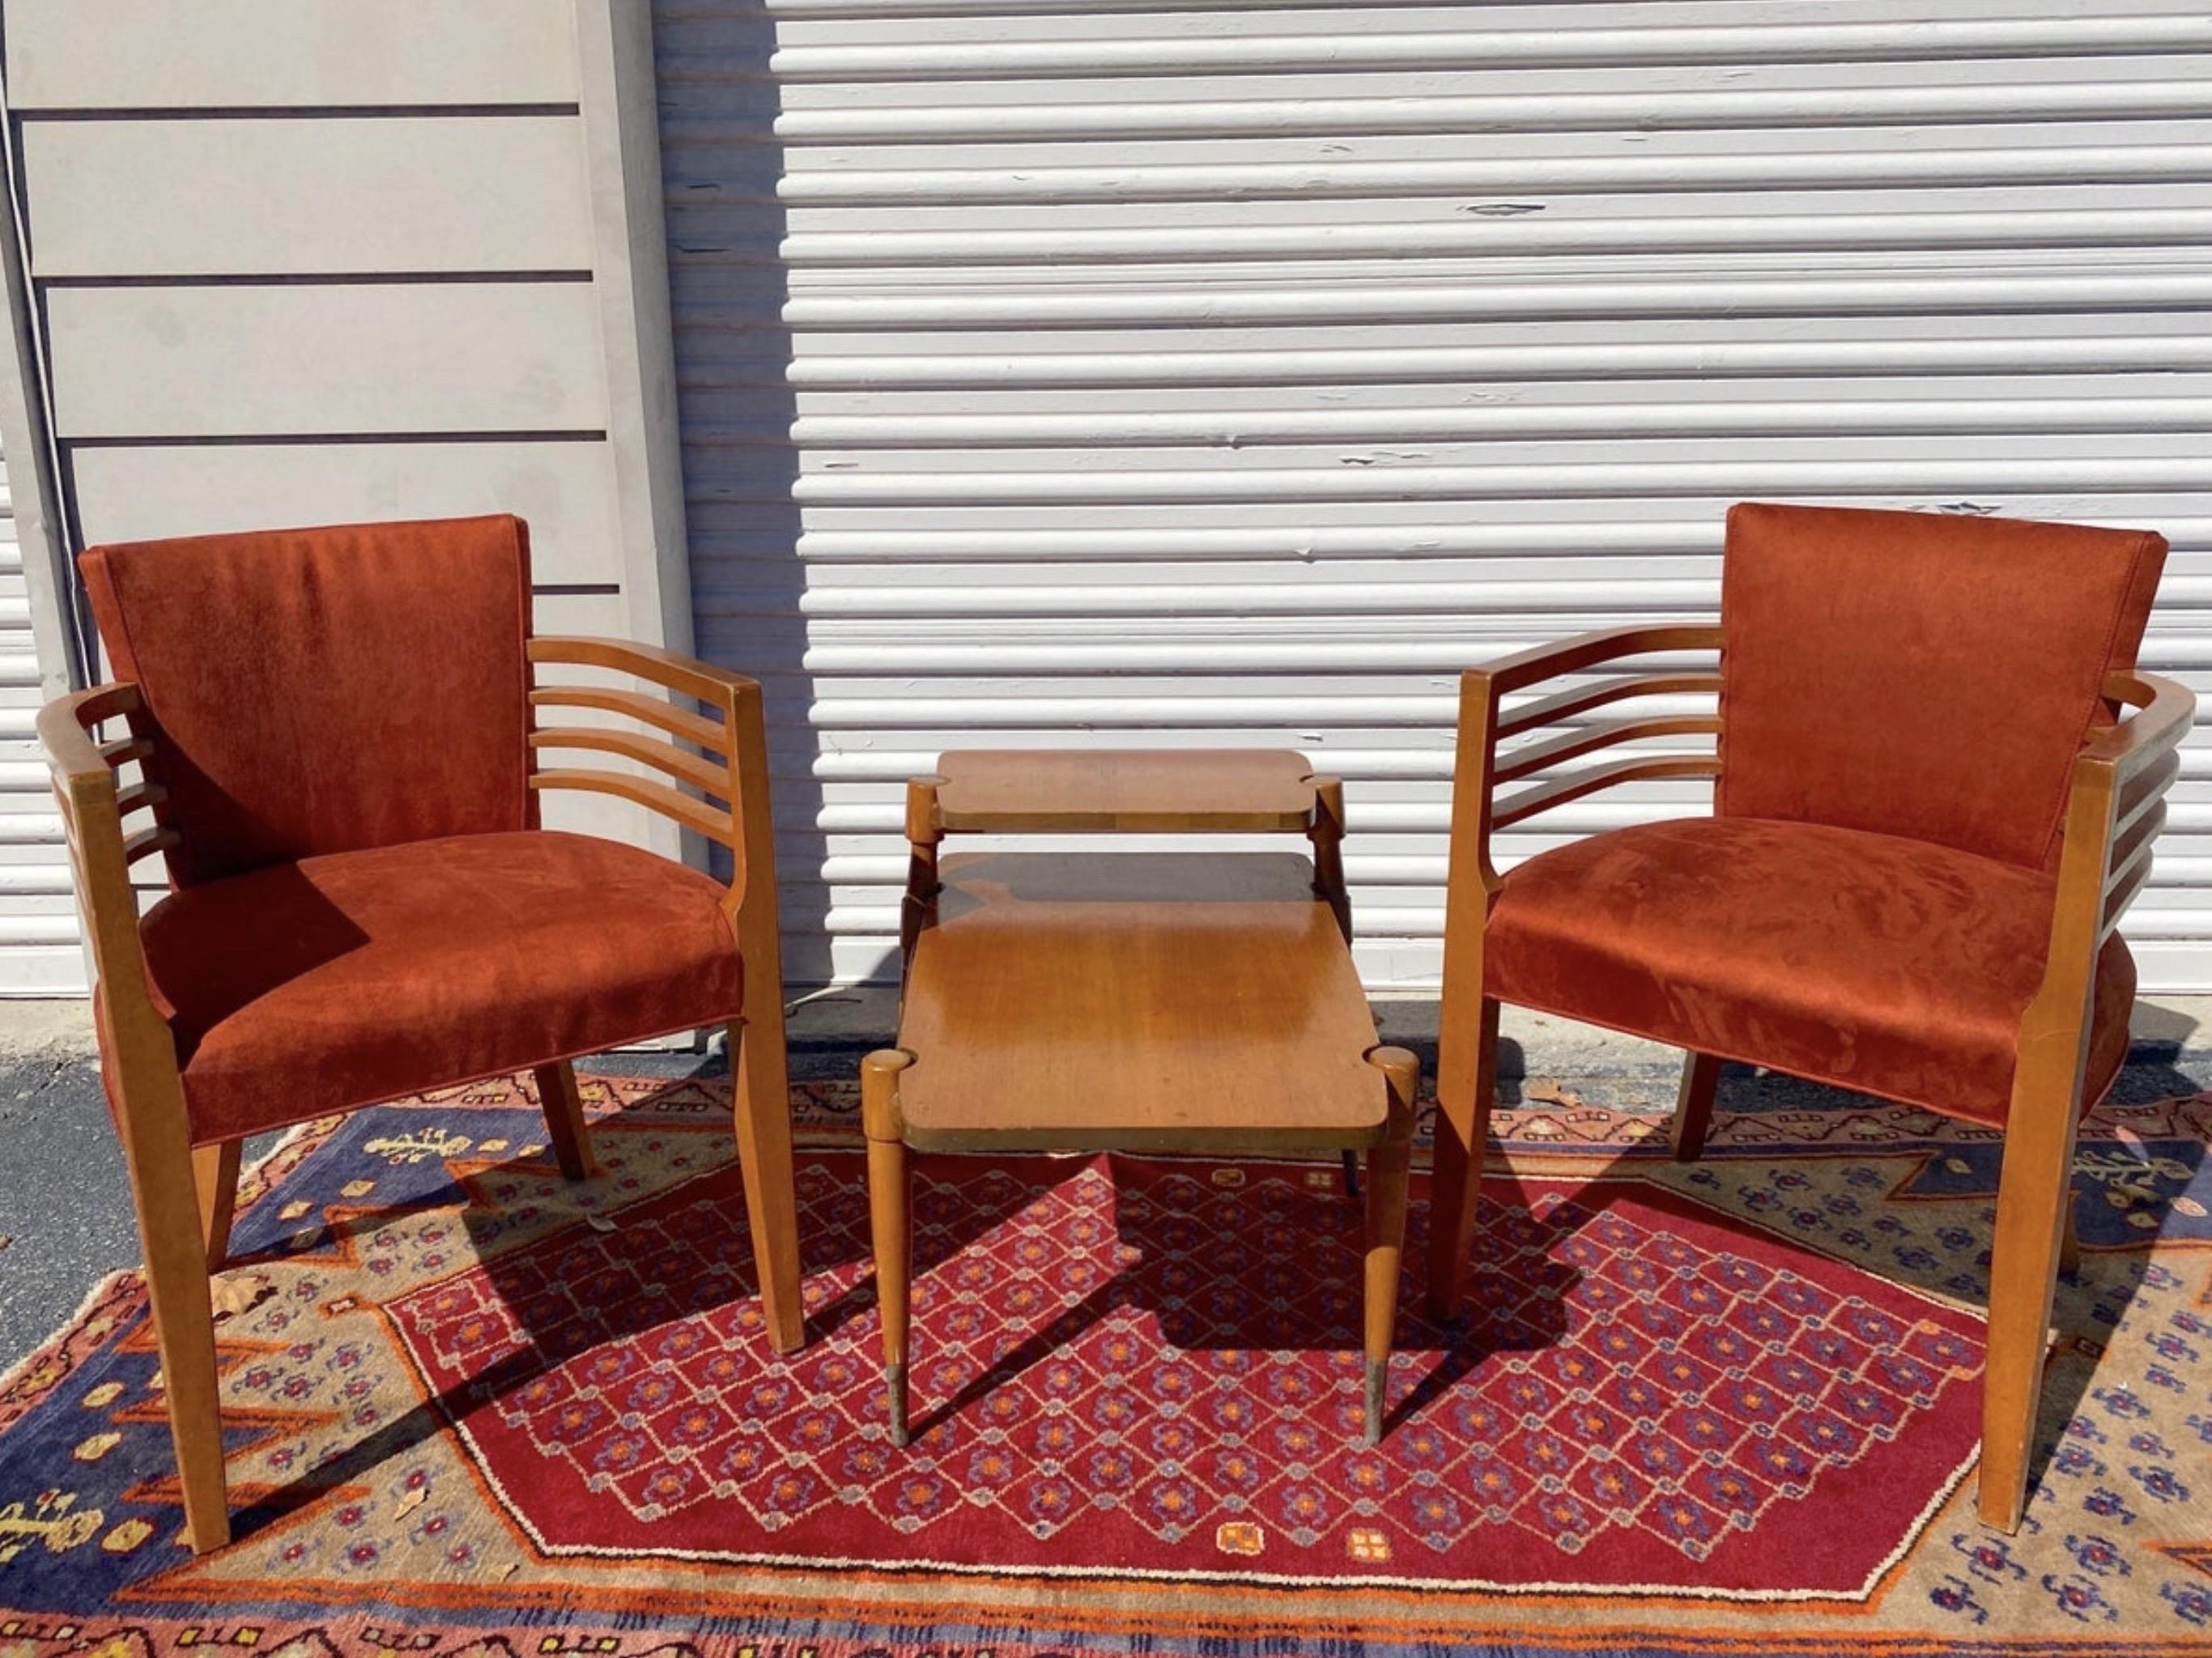 This listing is for 4 amazing and dramatic 4 arm rung Art Deco style arm chairs. set of four dining armchairs made by Spinneybeck for Knoll. The chairs are made in a sculptural Art Deco modern style from hardwood frames They have been upholstered in